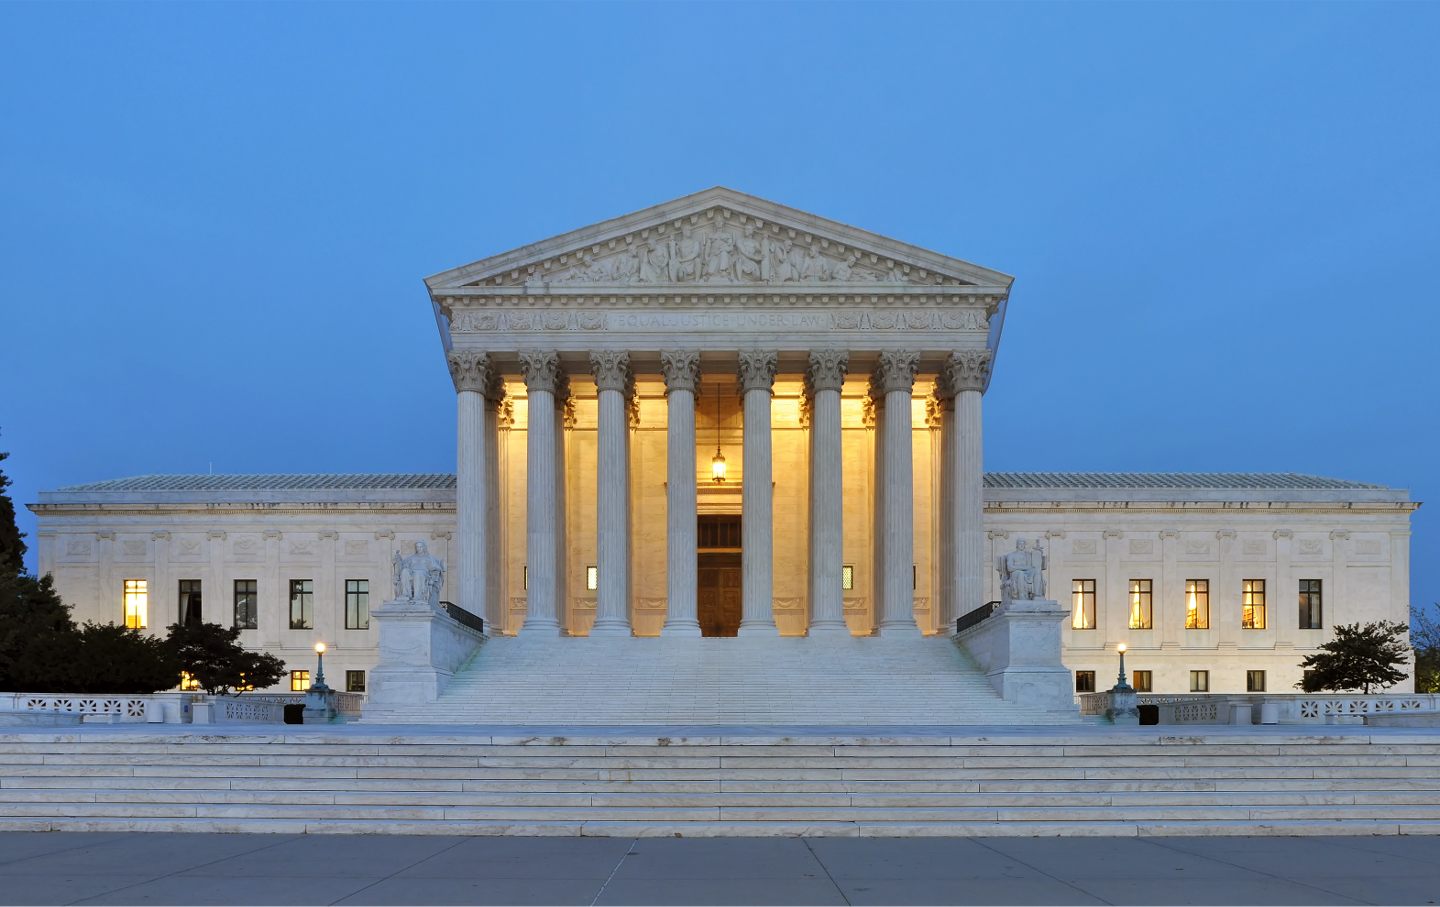 The west facade of the Supreme Court Building in Washington, D.C., at dusk.